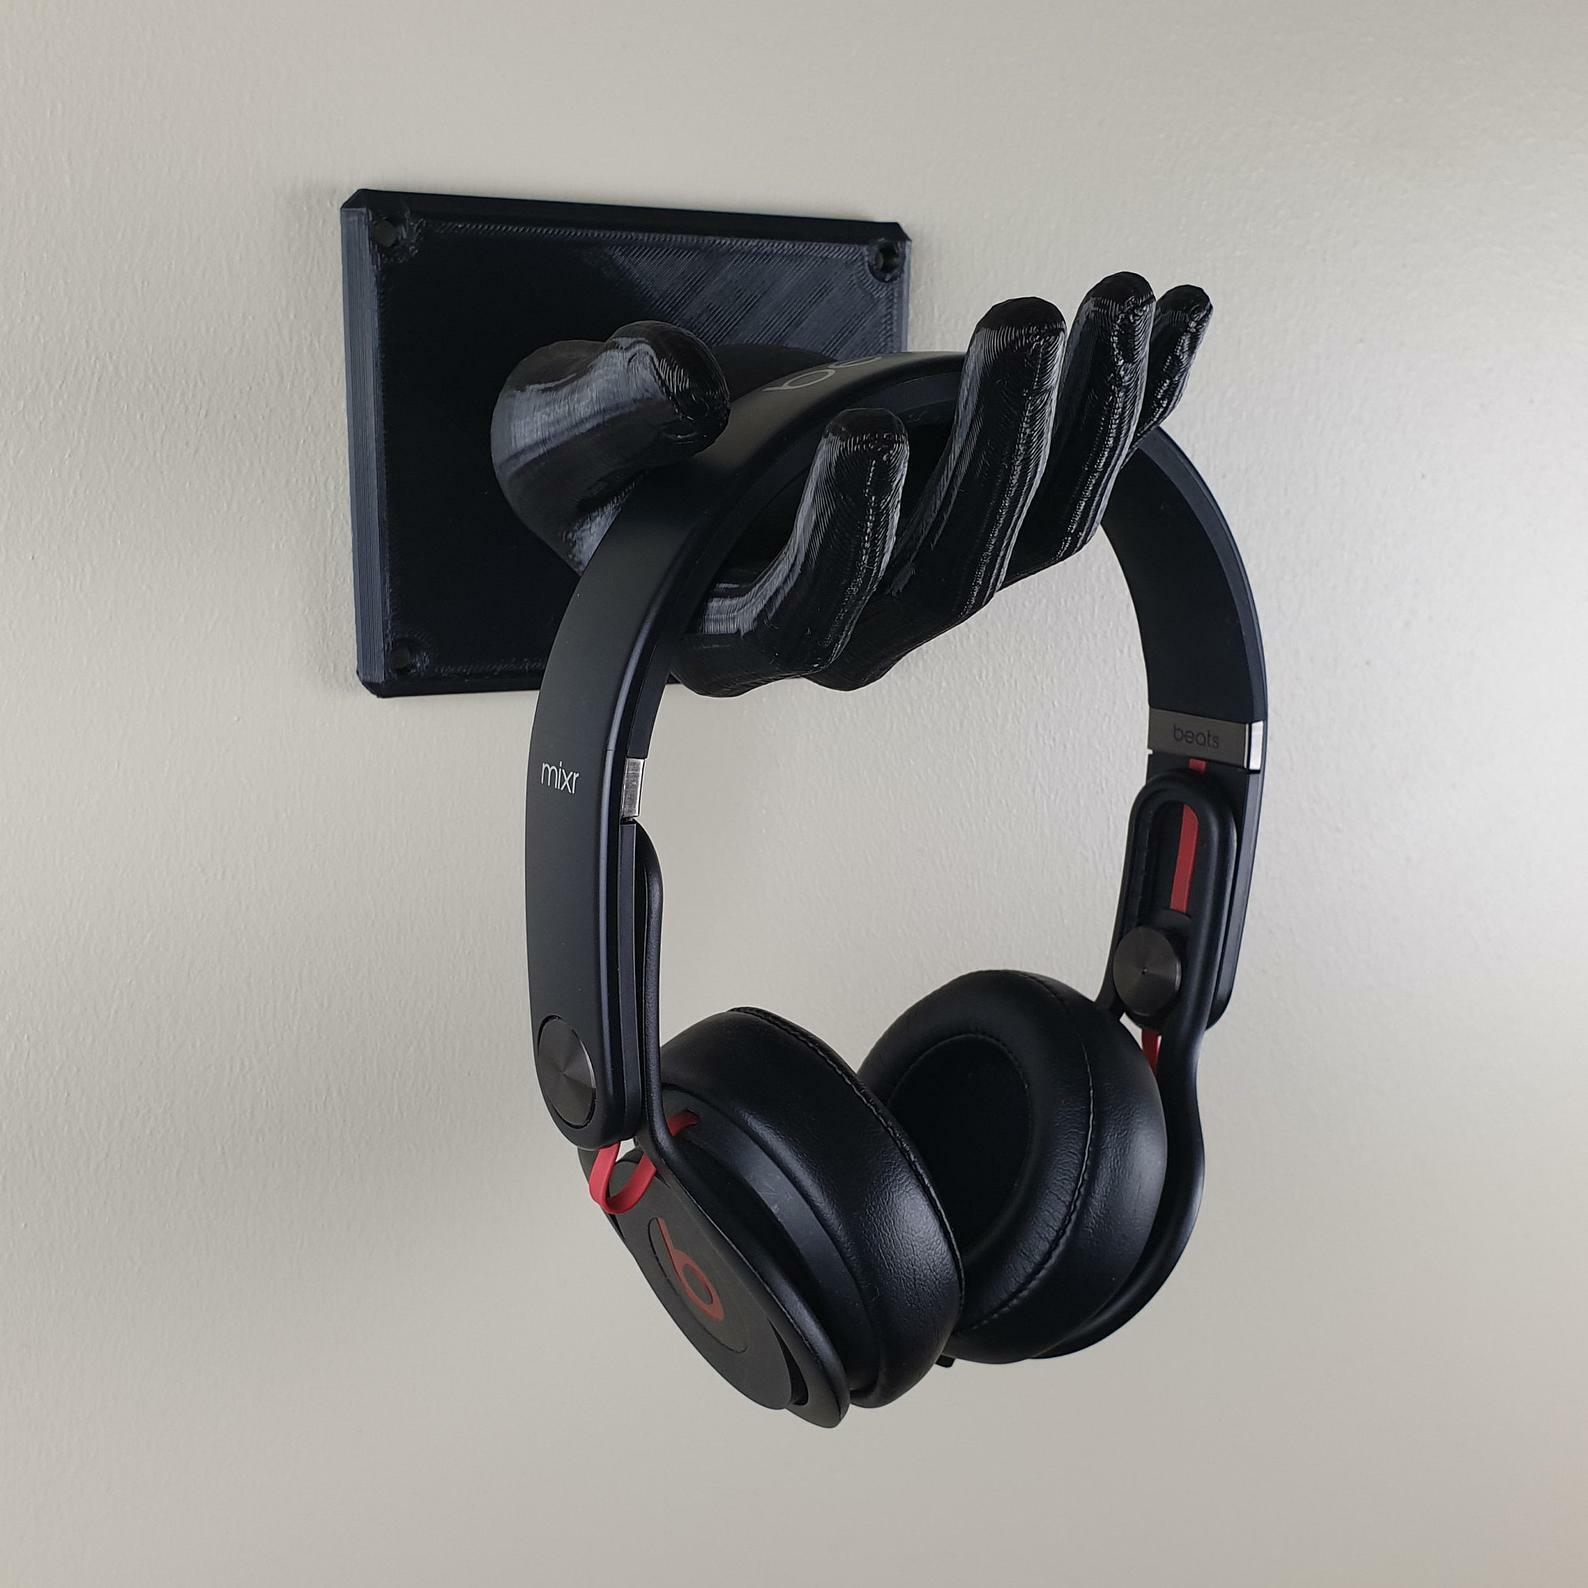 Sculptural Wall-mounted Headphone Display Stand